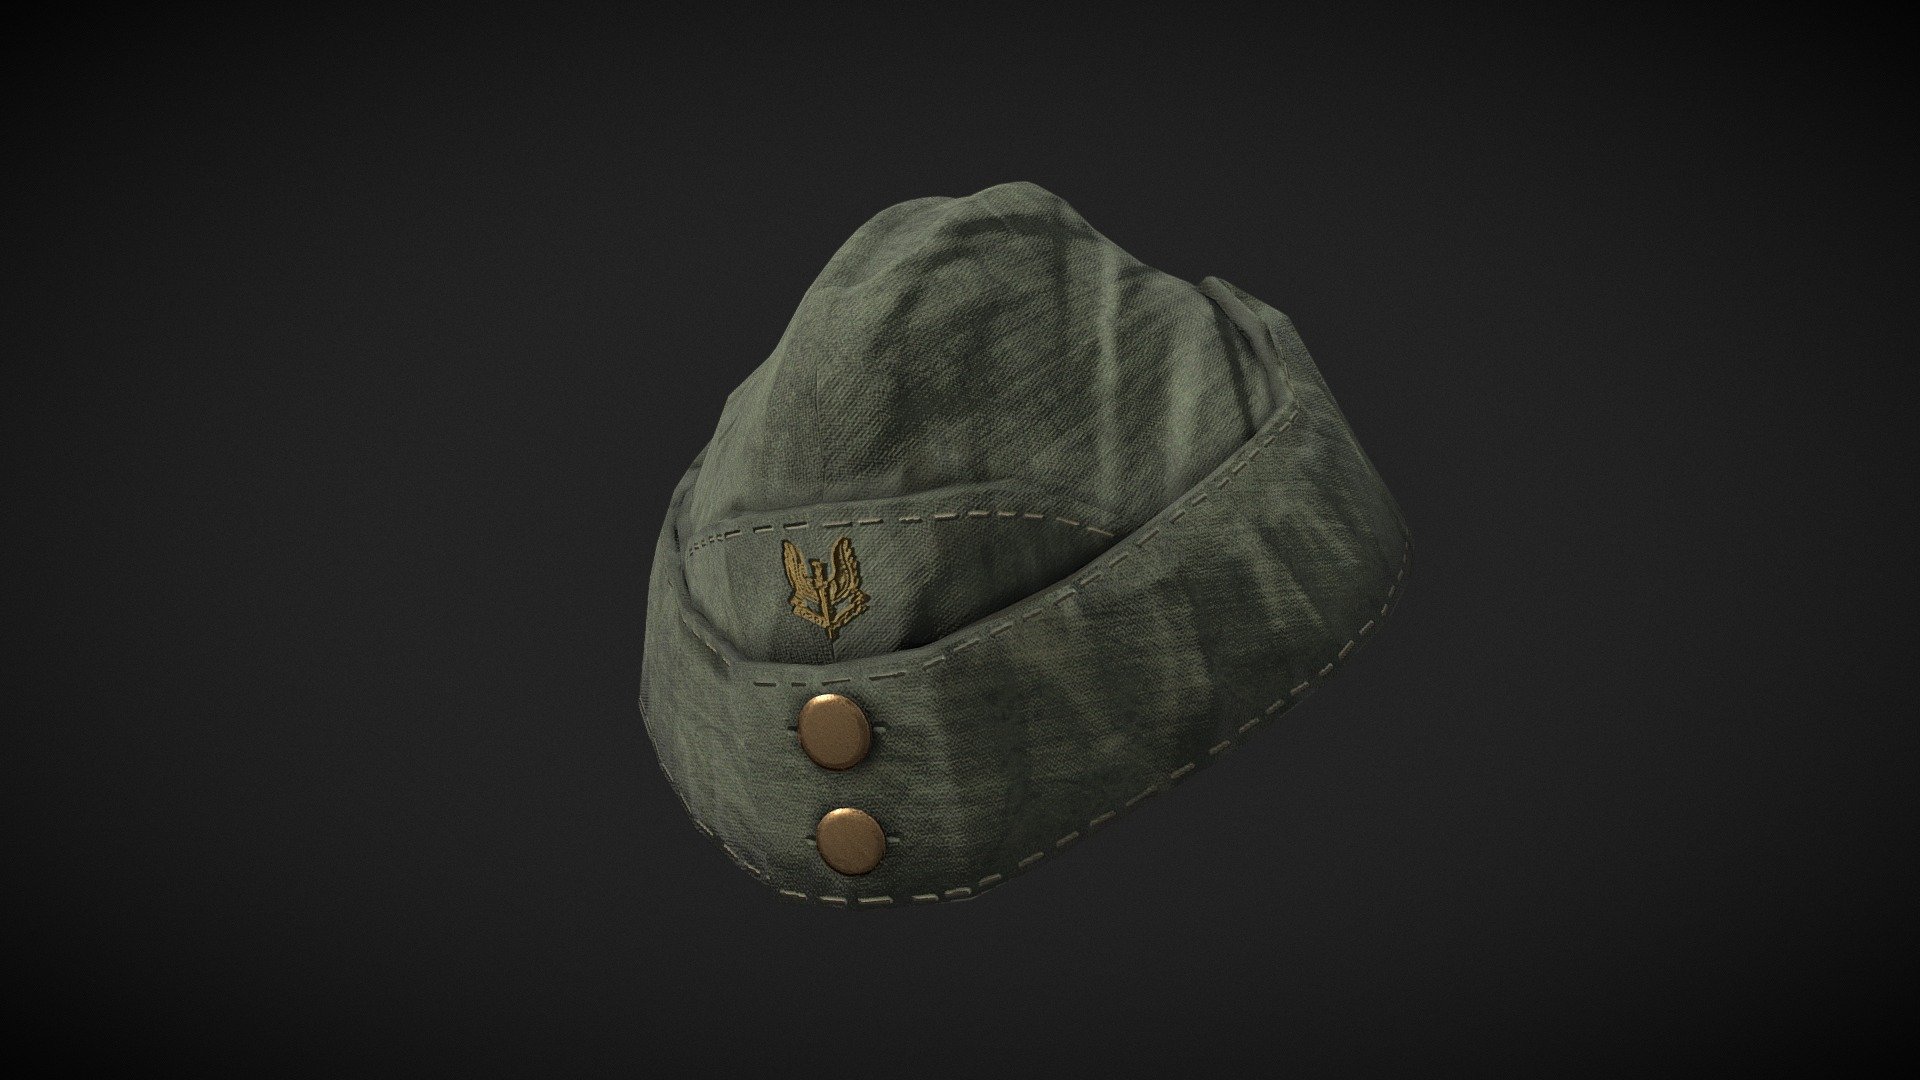 WWII British SAS Cap - Armor Model/Texture work by Outworld Studios

Must give credit to Outworld Studios if using this asset

Show support by joining my discord: https://discord.gg/EgWSkp8Cxn

Portoflio: https://www.artstation.com/artwork/DvvZZ9 - WWII British SAS Cap (World War Two) - Buy Royalty Free 3D model by Outworld Studios (@outworldstudios) 3d model